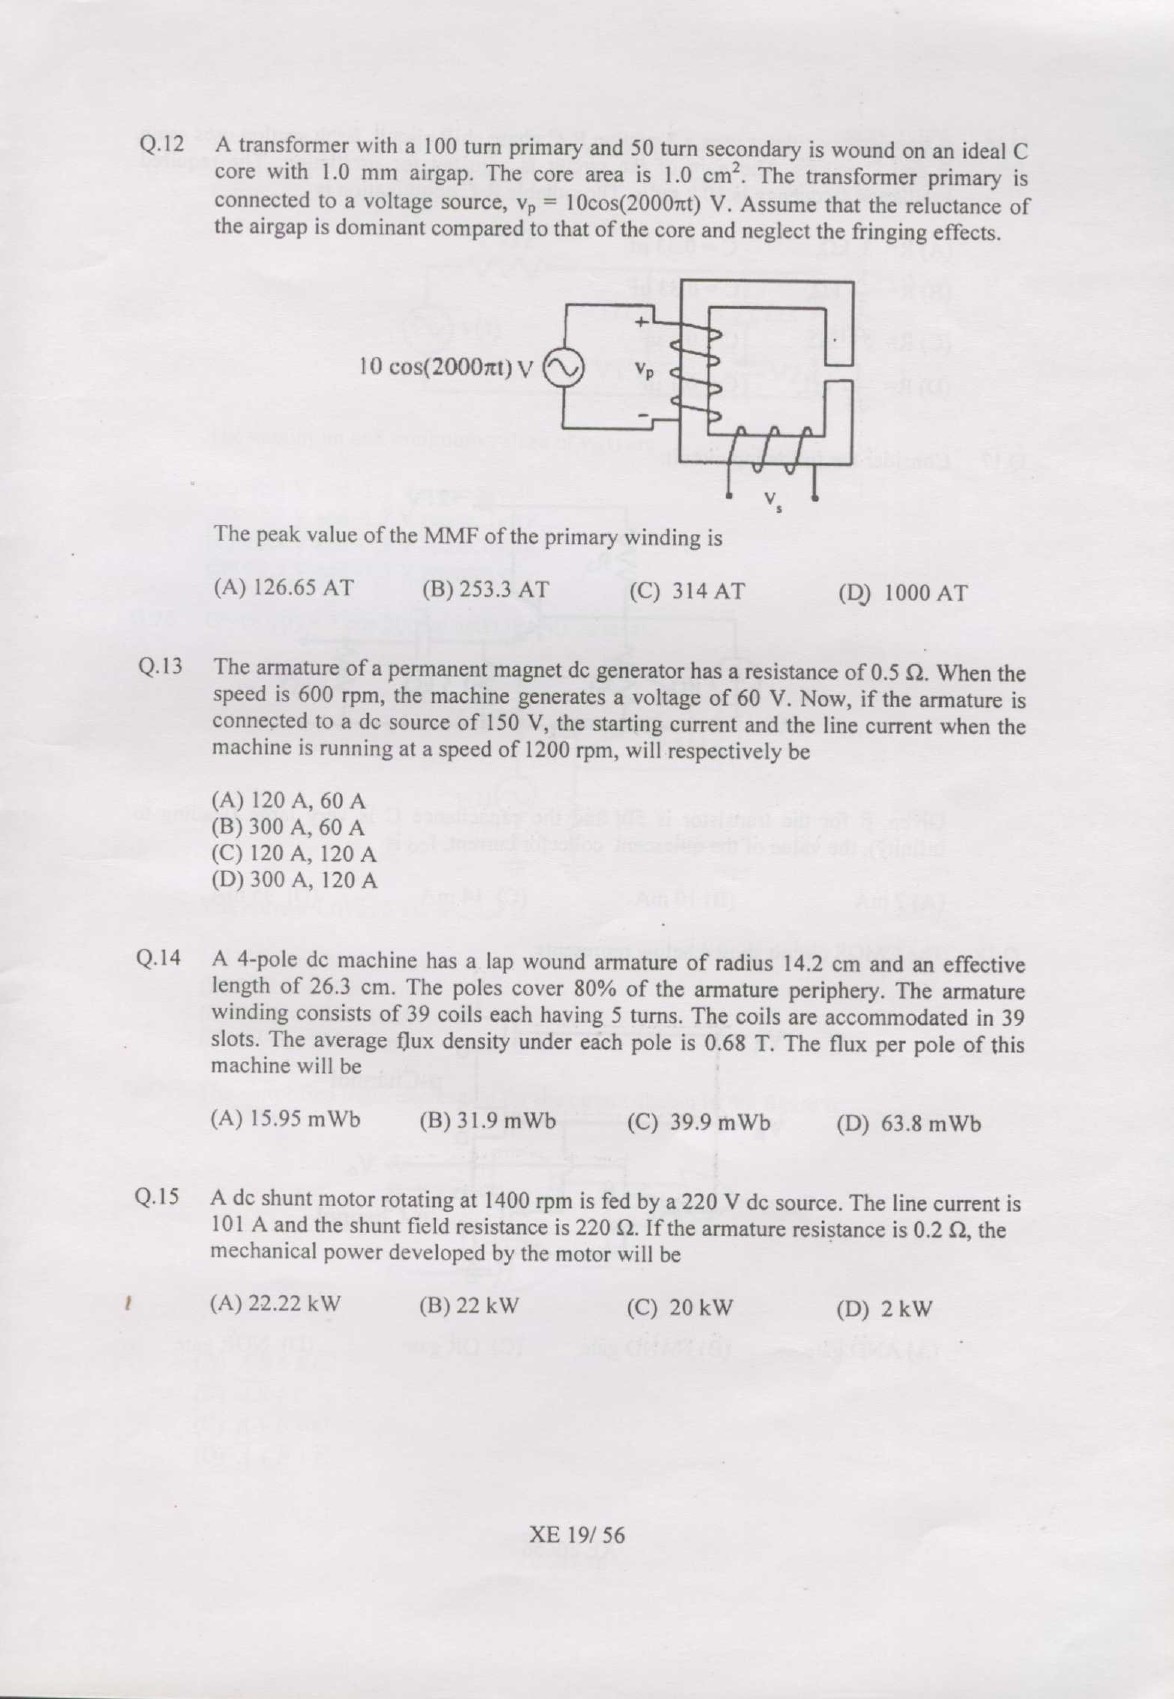 GATE Exam Question Paper 2007 Engineering Sciences 19